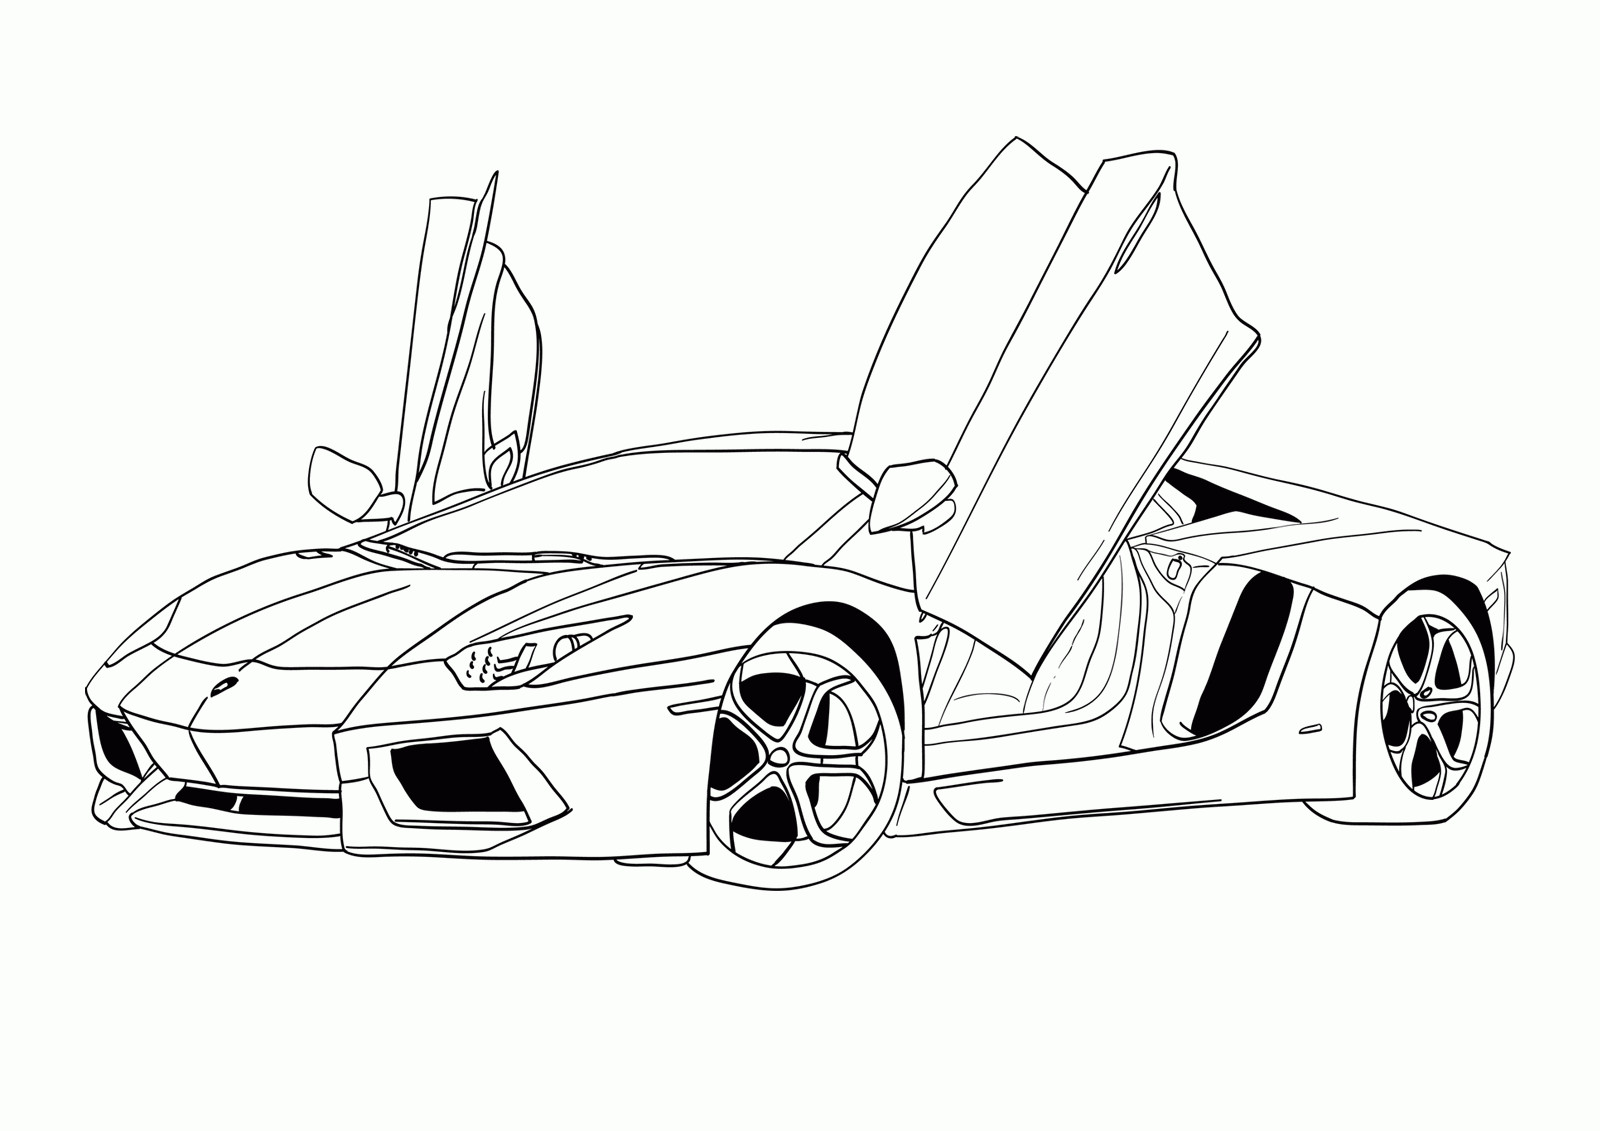 Printable Cars Coloring Pages
 Coloring Pages Cars Coloring Pages Free and Printable